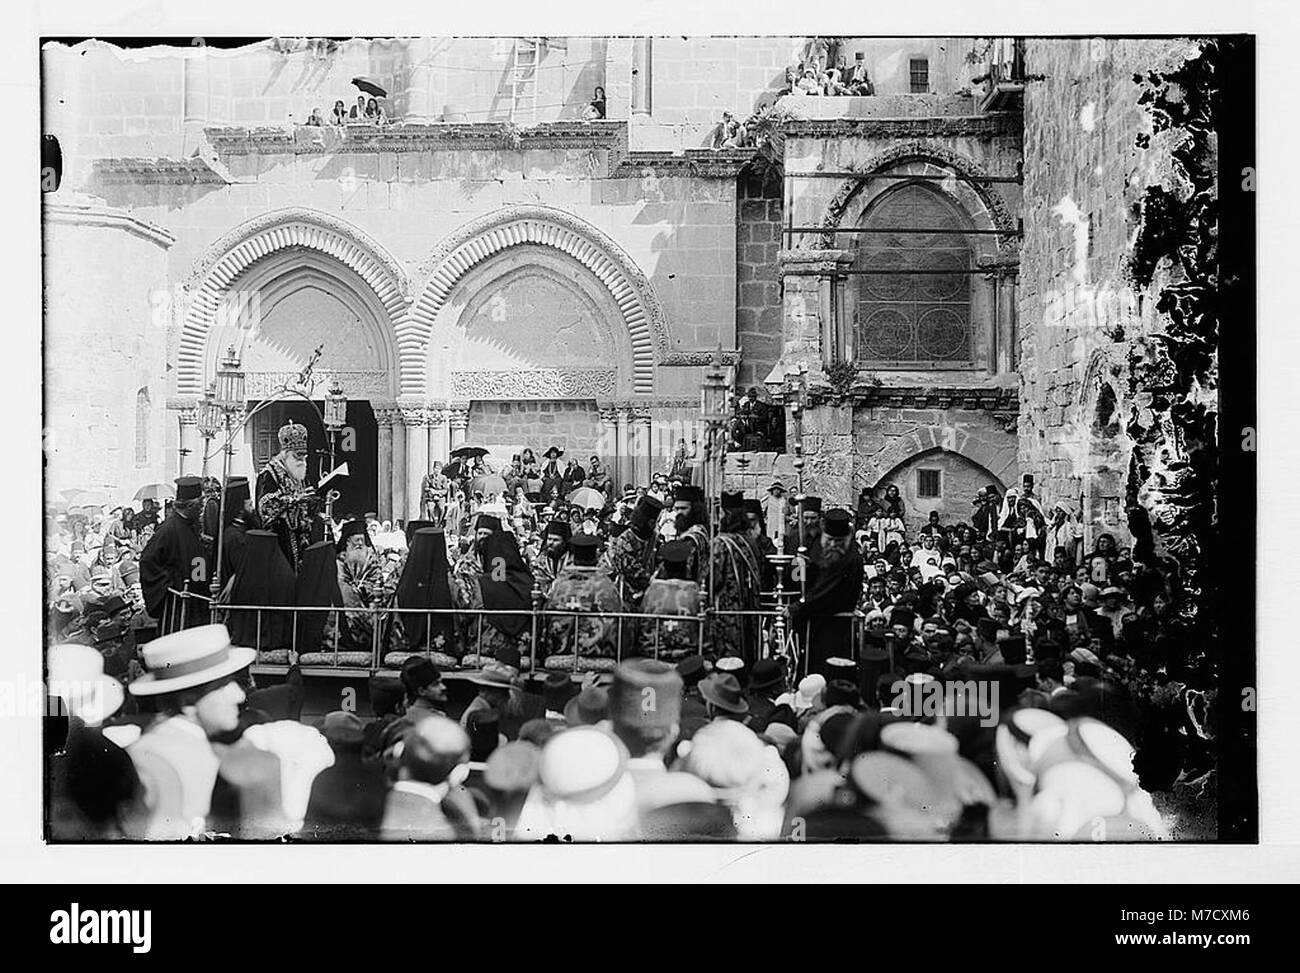 Foot washing ceremony, possibly with Syrian Orthodox patriarch, outside the Church of the Holy Sepulchre, Jerusalem LOC matpc.07435 Stock Photo